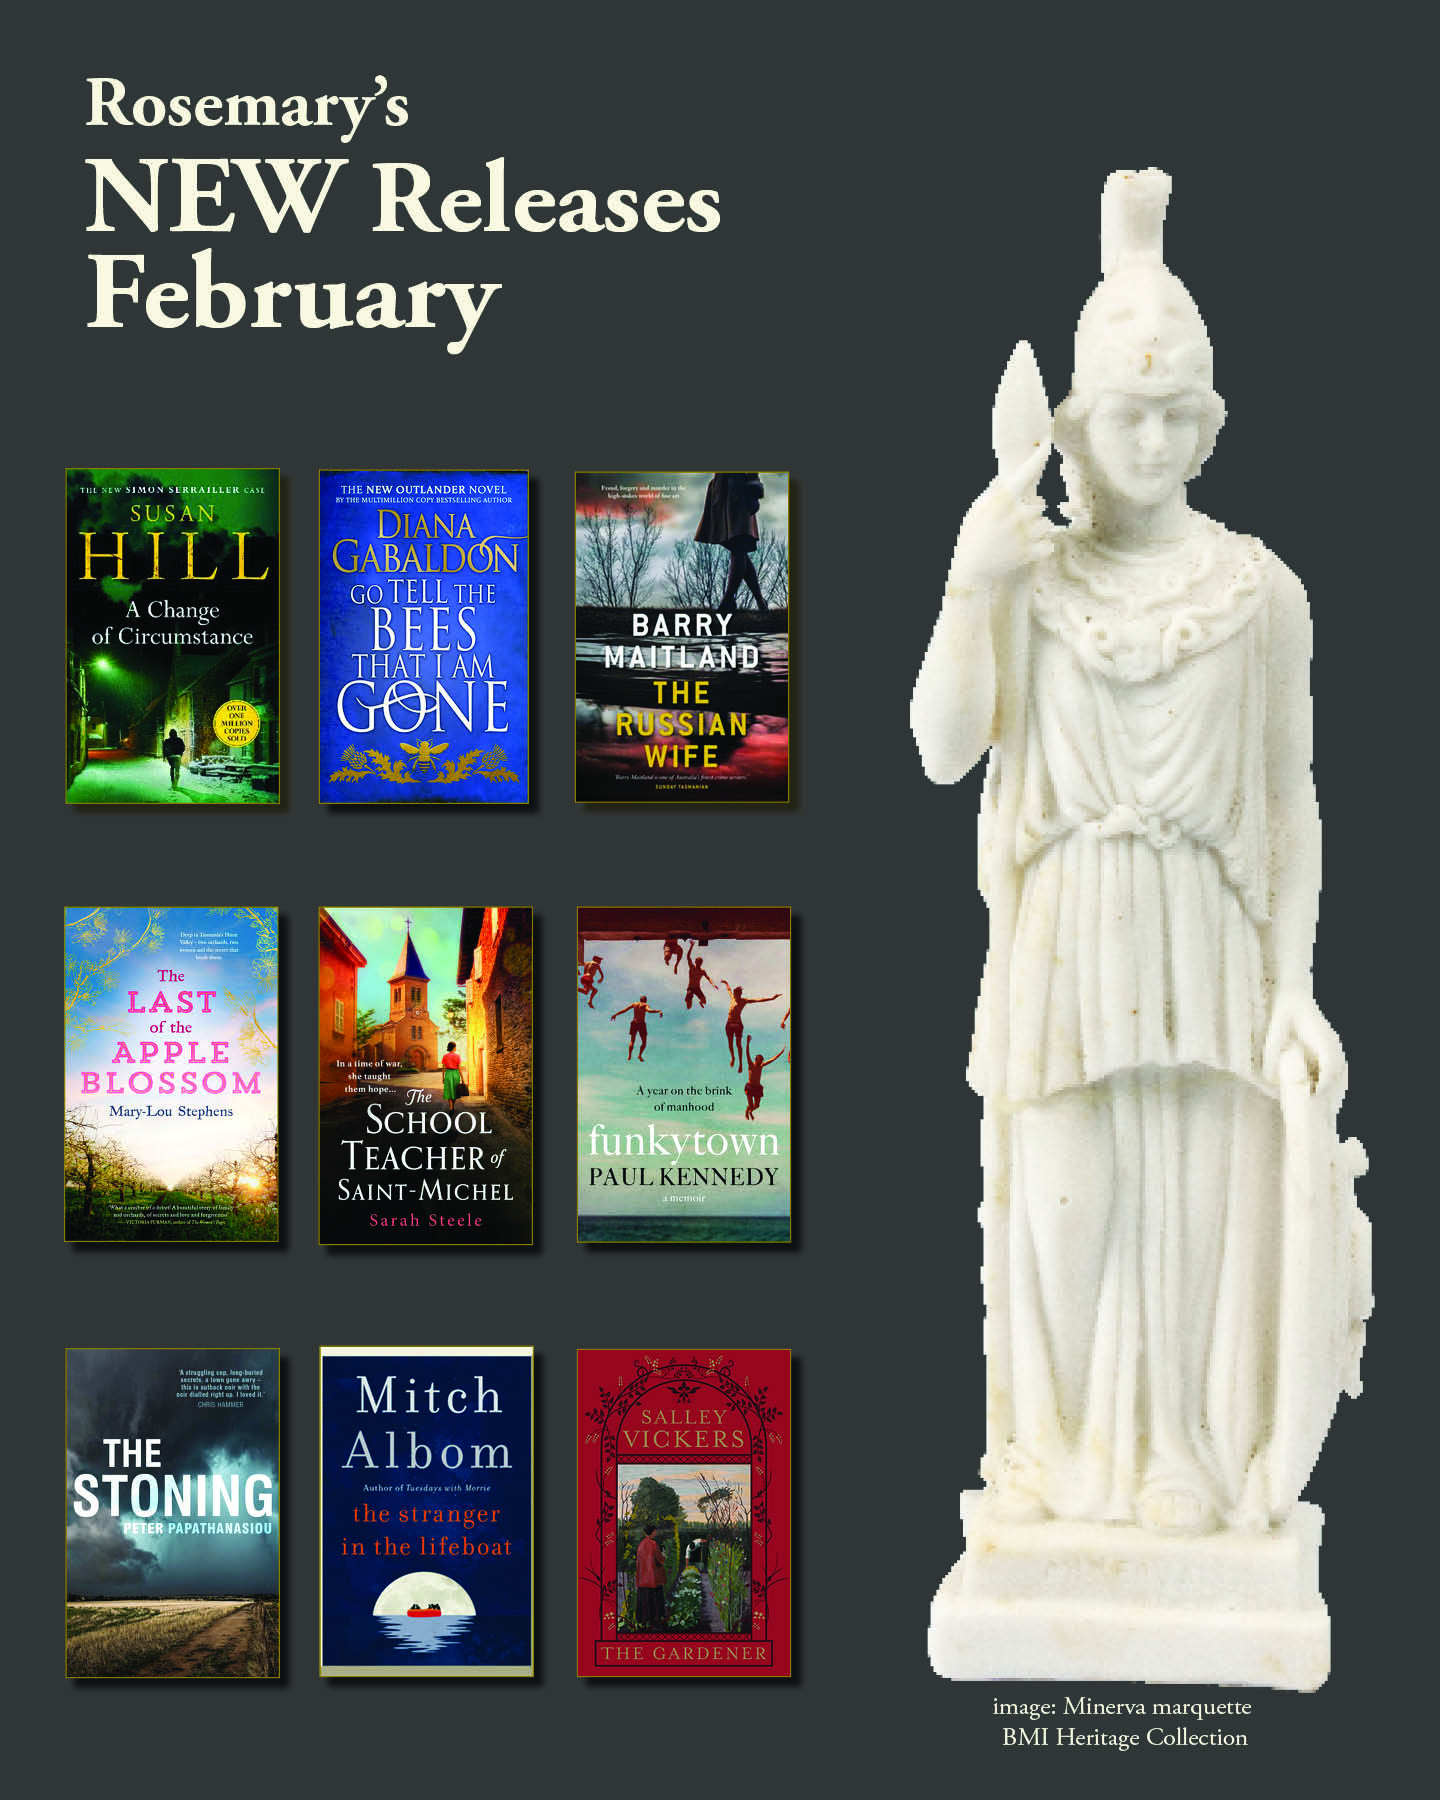 images of 9 book covers on a grey background with a white miniature of the statue of Minerva